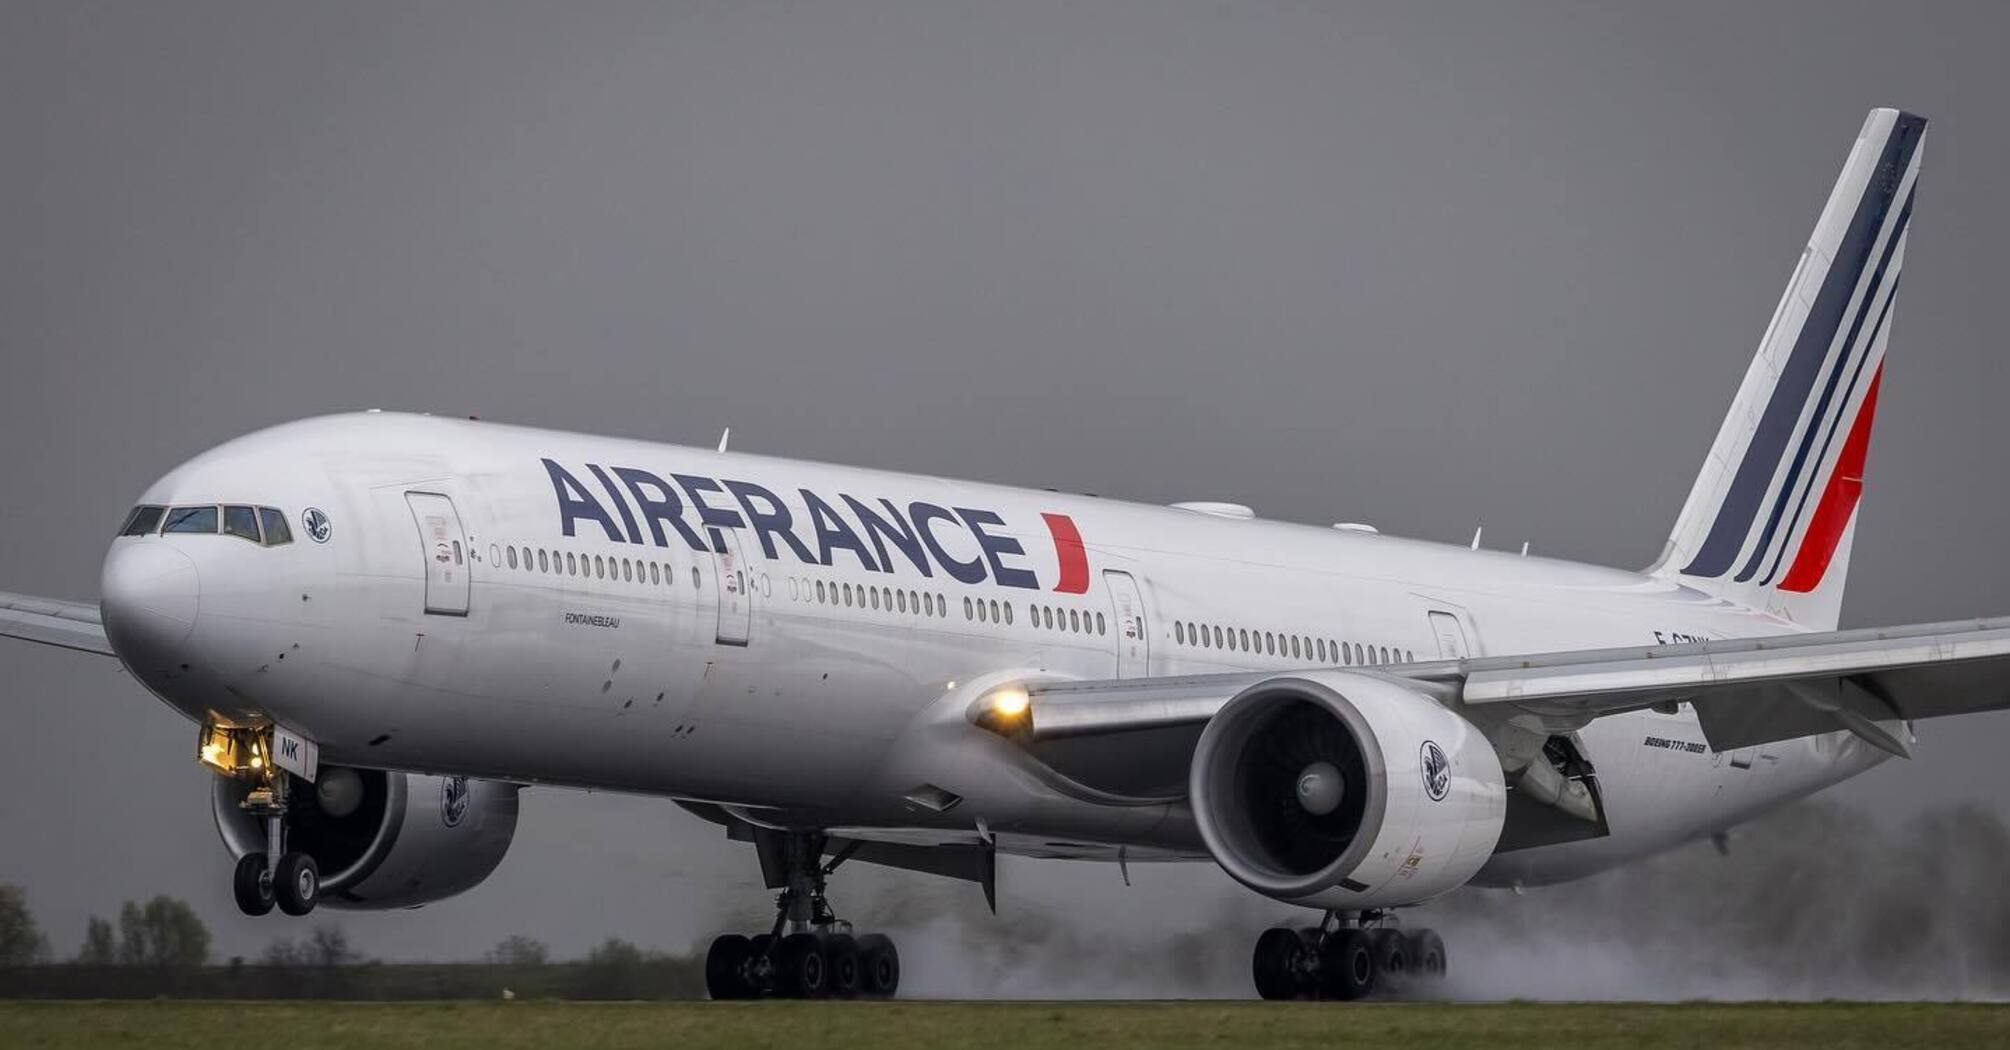 Air France is resuming flights to Paris ahead of the upcoming Olympic Games